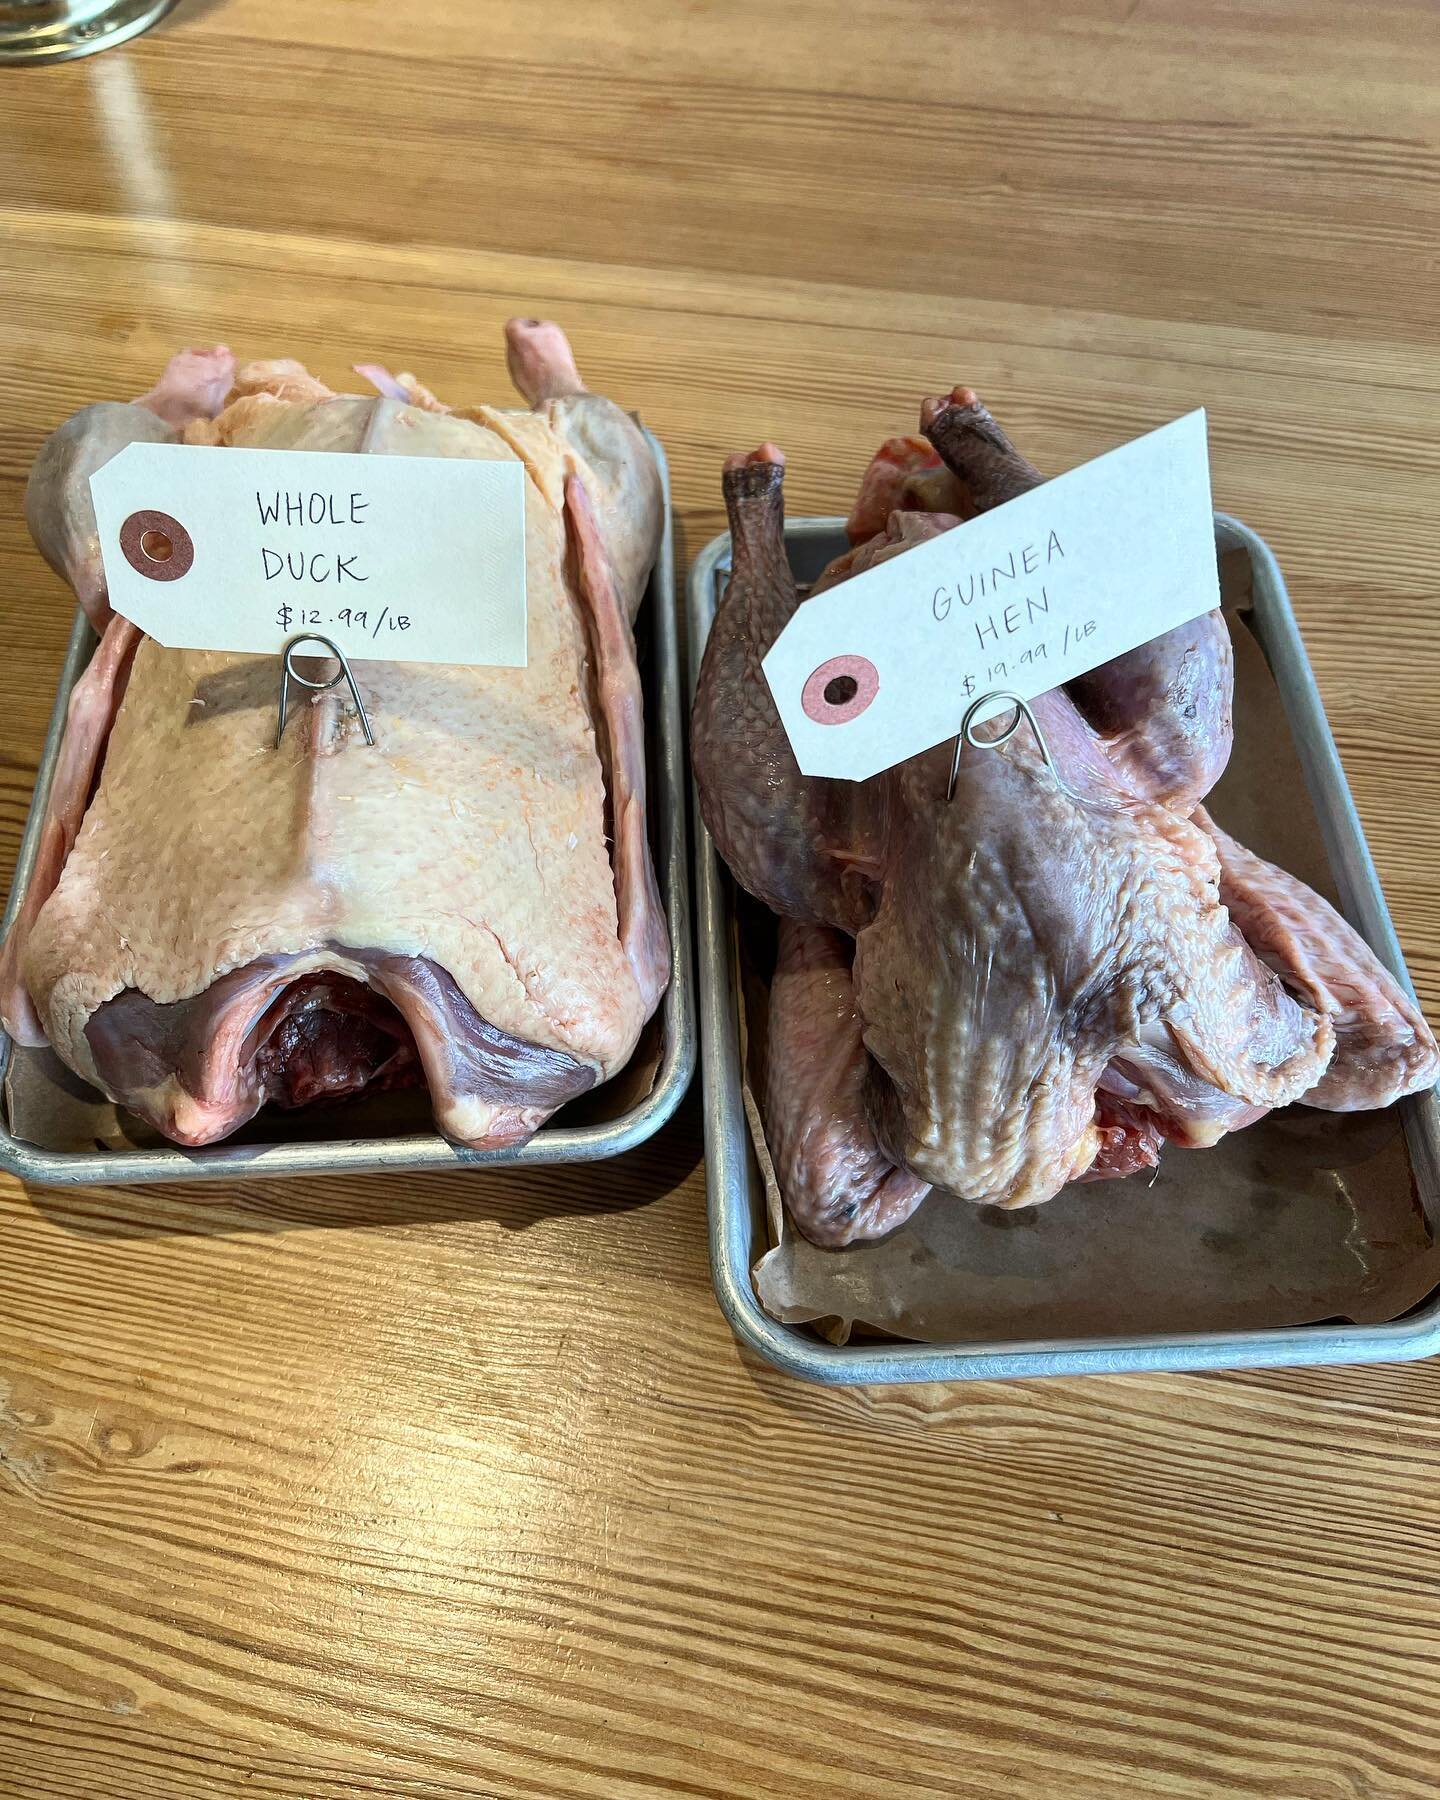 We&rsquo;ve got whole ducks and Guinea hen in the case from one of our favorite producers @comfortfarms come by and pick up a rainy Sunday bird to roast!
🌧️☔️🦆🦅☔️🌧️